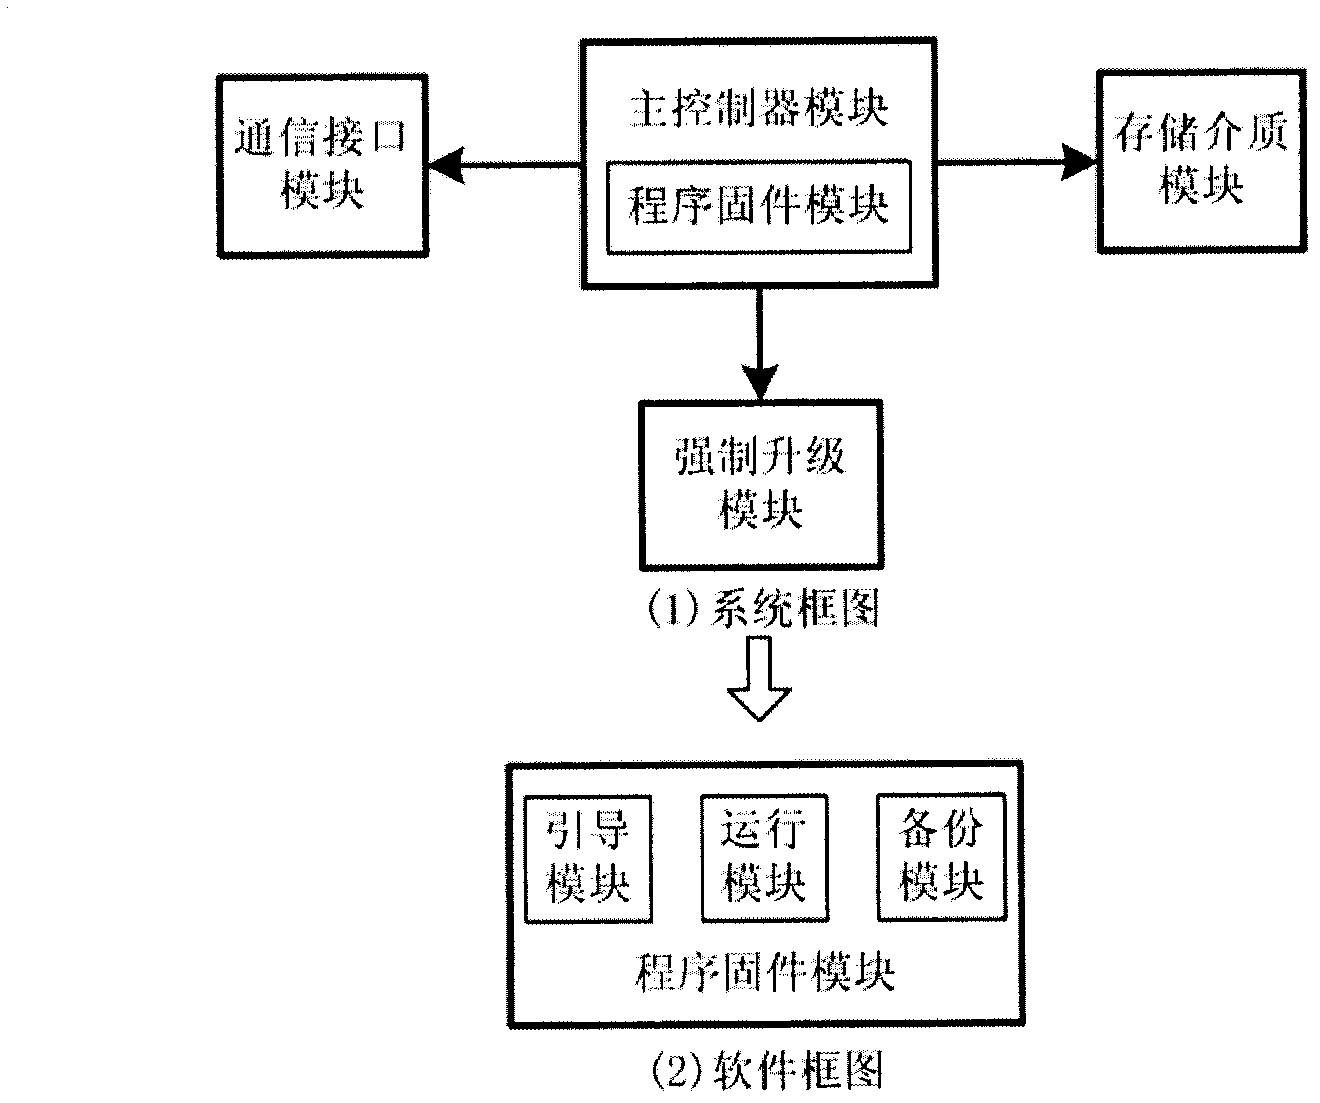 Firmware upgrading system based on communication interfaces